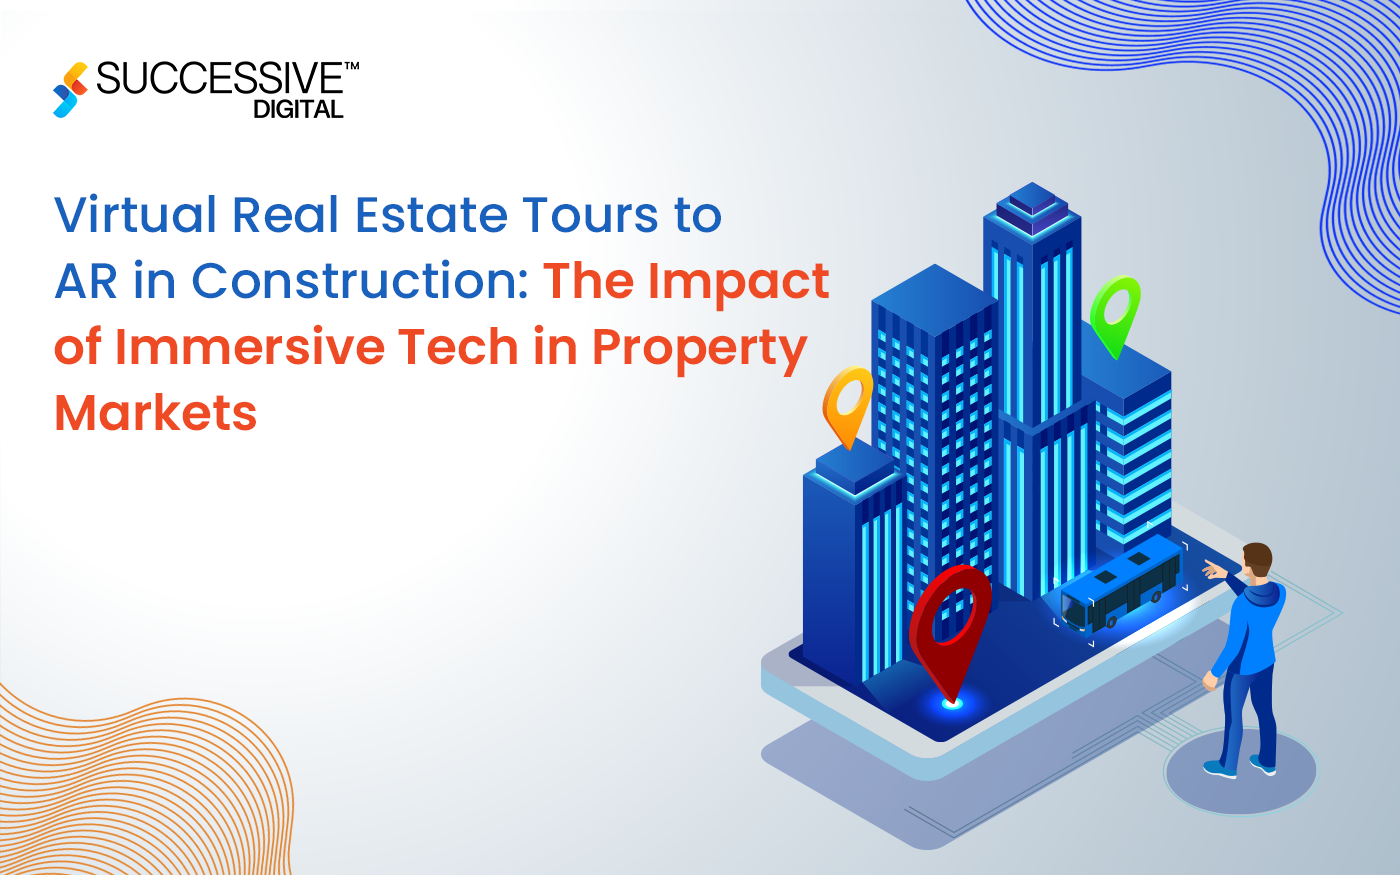 Virtual Real Estate Tours to AR in Construction The Impact of Immersive Tech in Property Markets